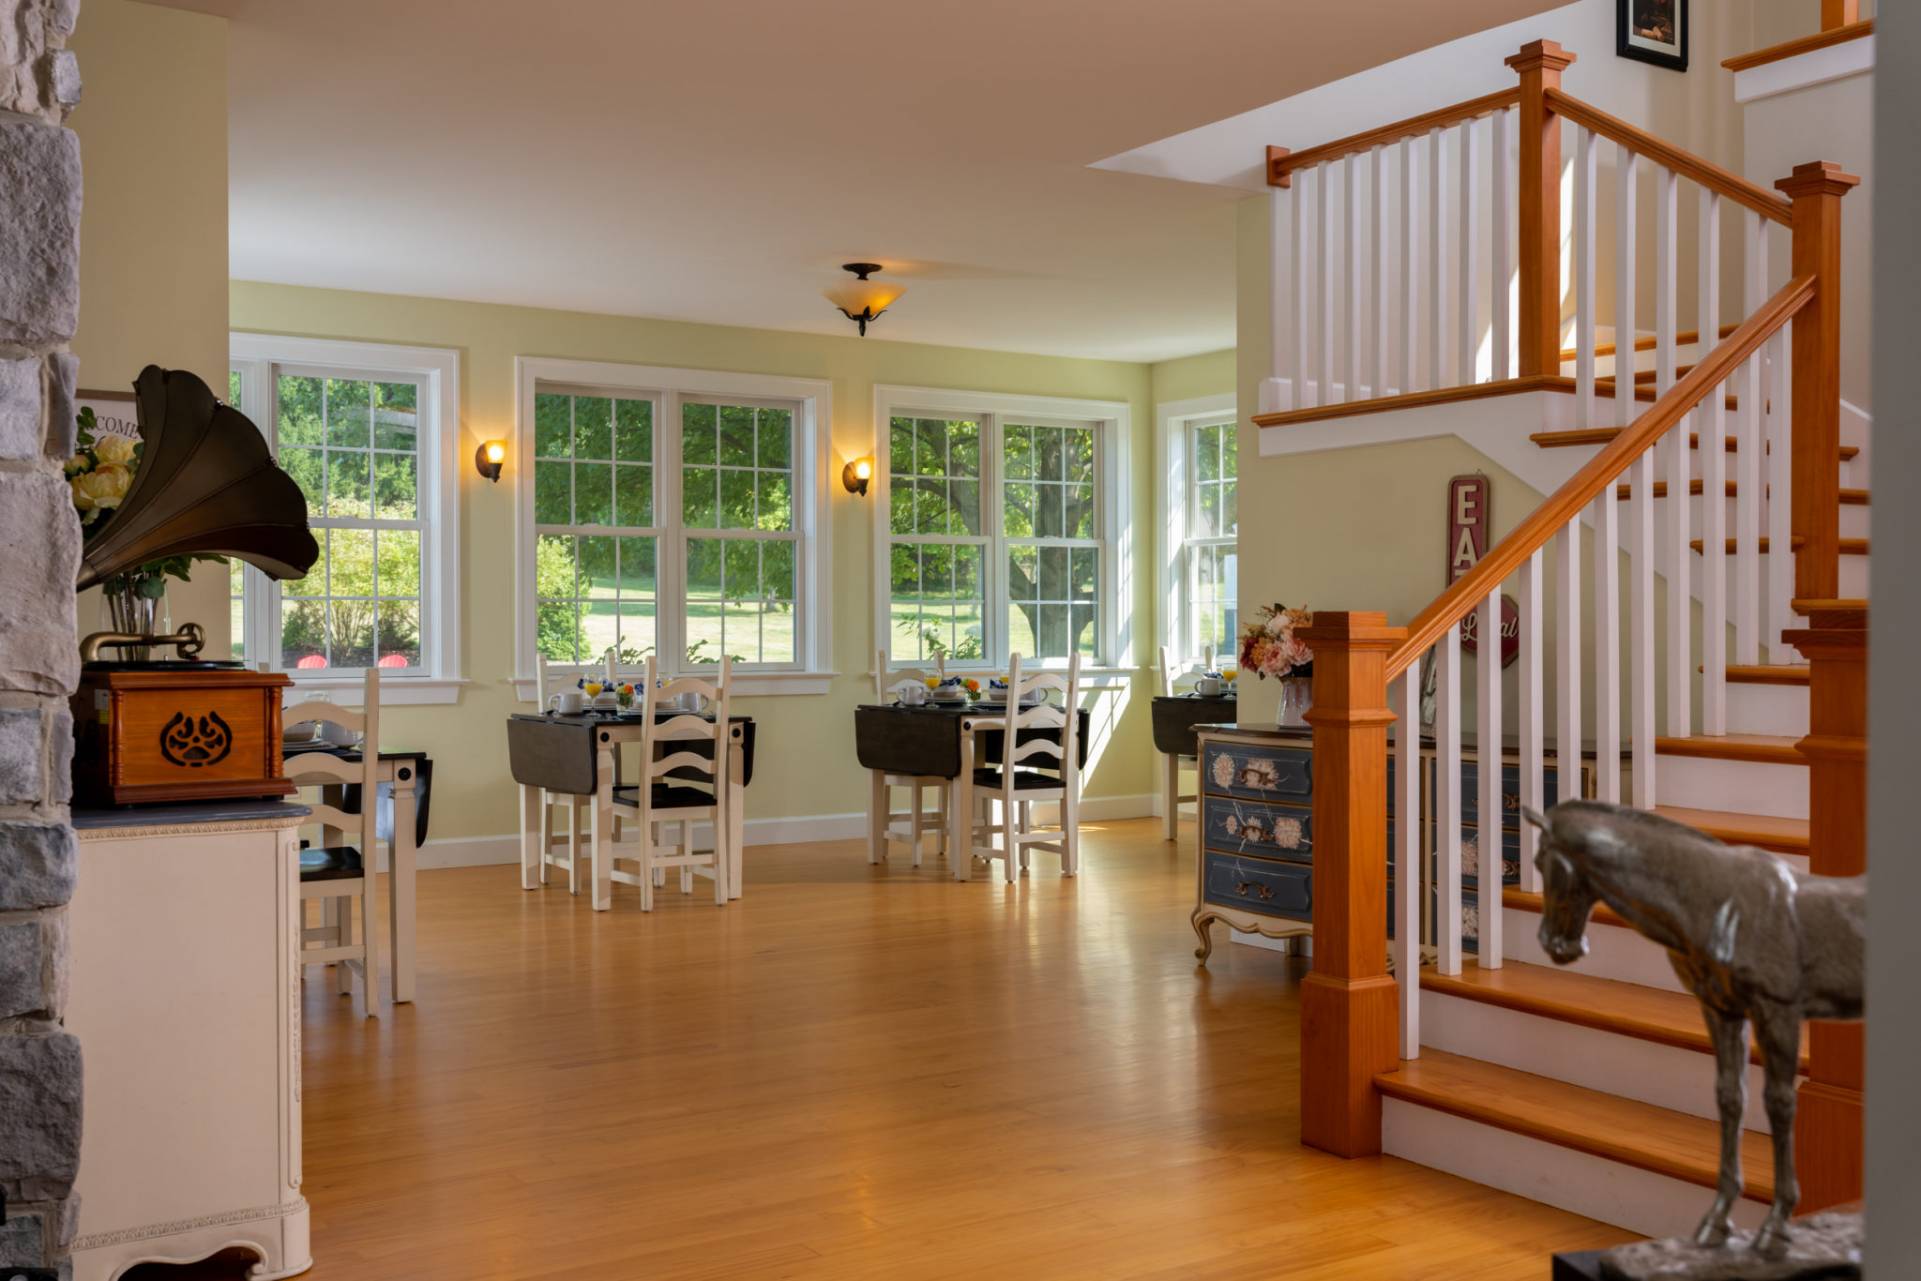 Dining area with separate white wood tables, windows to outside, hardwood floors